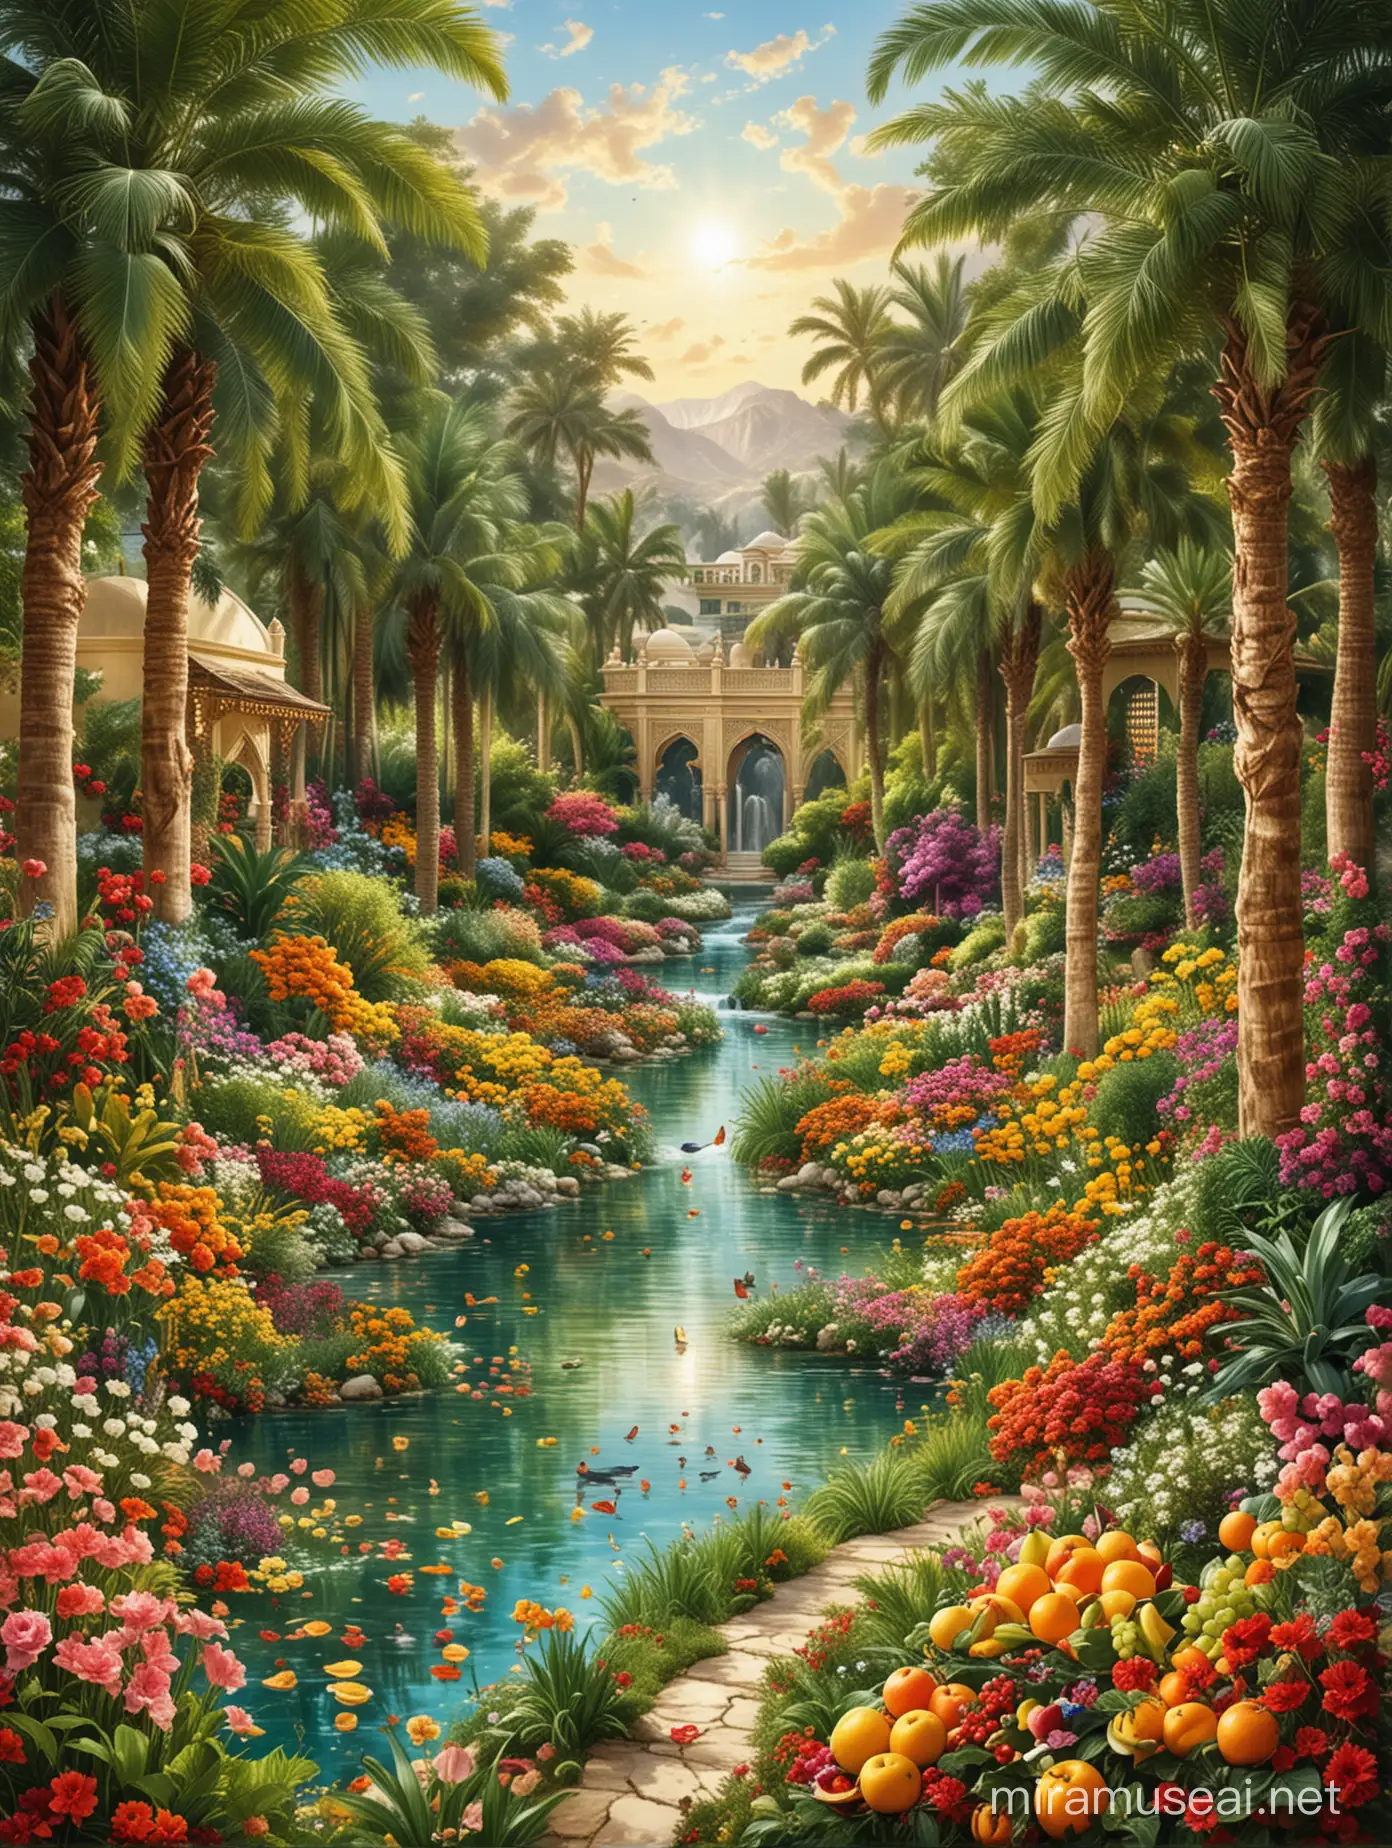 
"Create an image depicting the depiction of paradise in the Quran. Include lush gardens, flowing rivers, luxurious furnishings, and fruits. Show inhabitants enjoying physical delights like exquisite food and drink, silk garments, and companions of perfect beauty. Emphasize the eternal nature of paradise , portraying it as a place of ultimate joy, spiritual fulfillment, and eternal bliss for those who believe in and obey Allah."